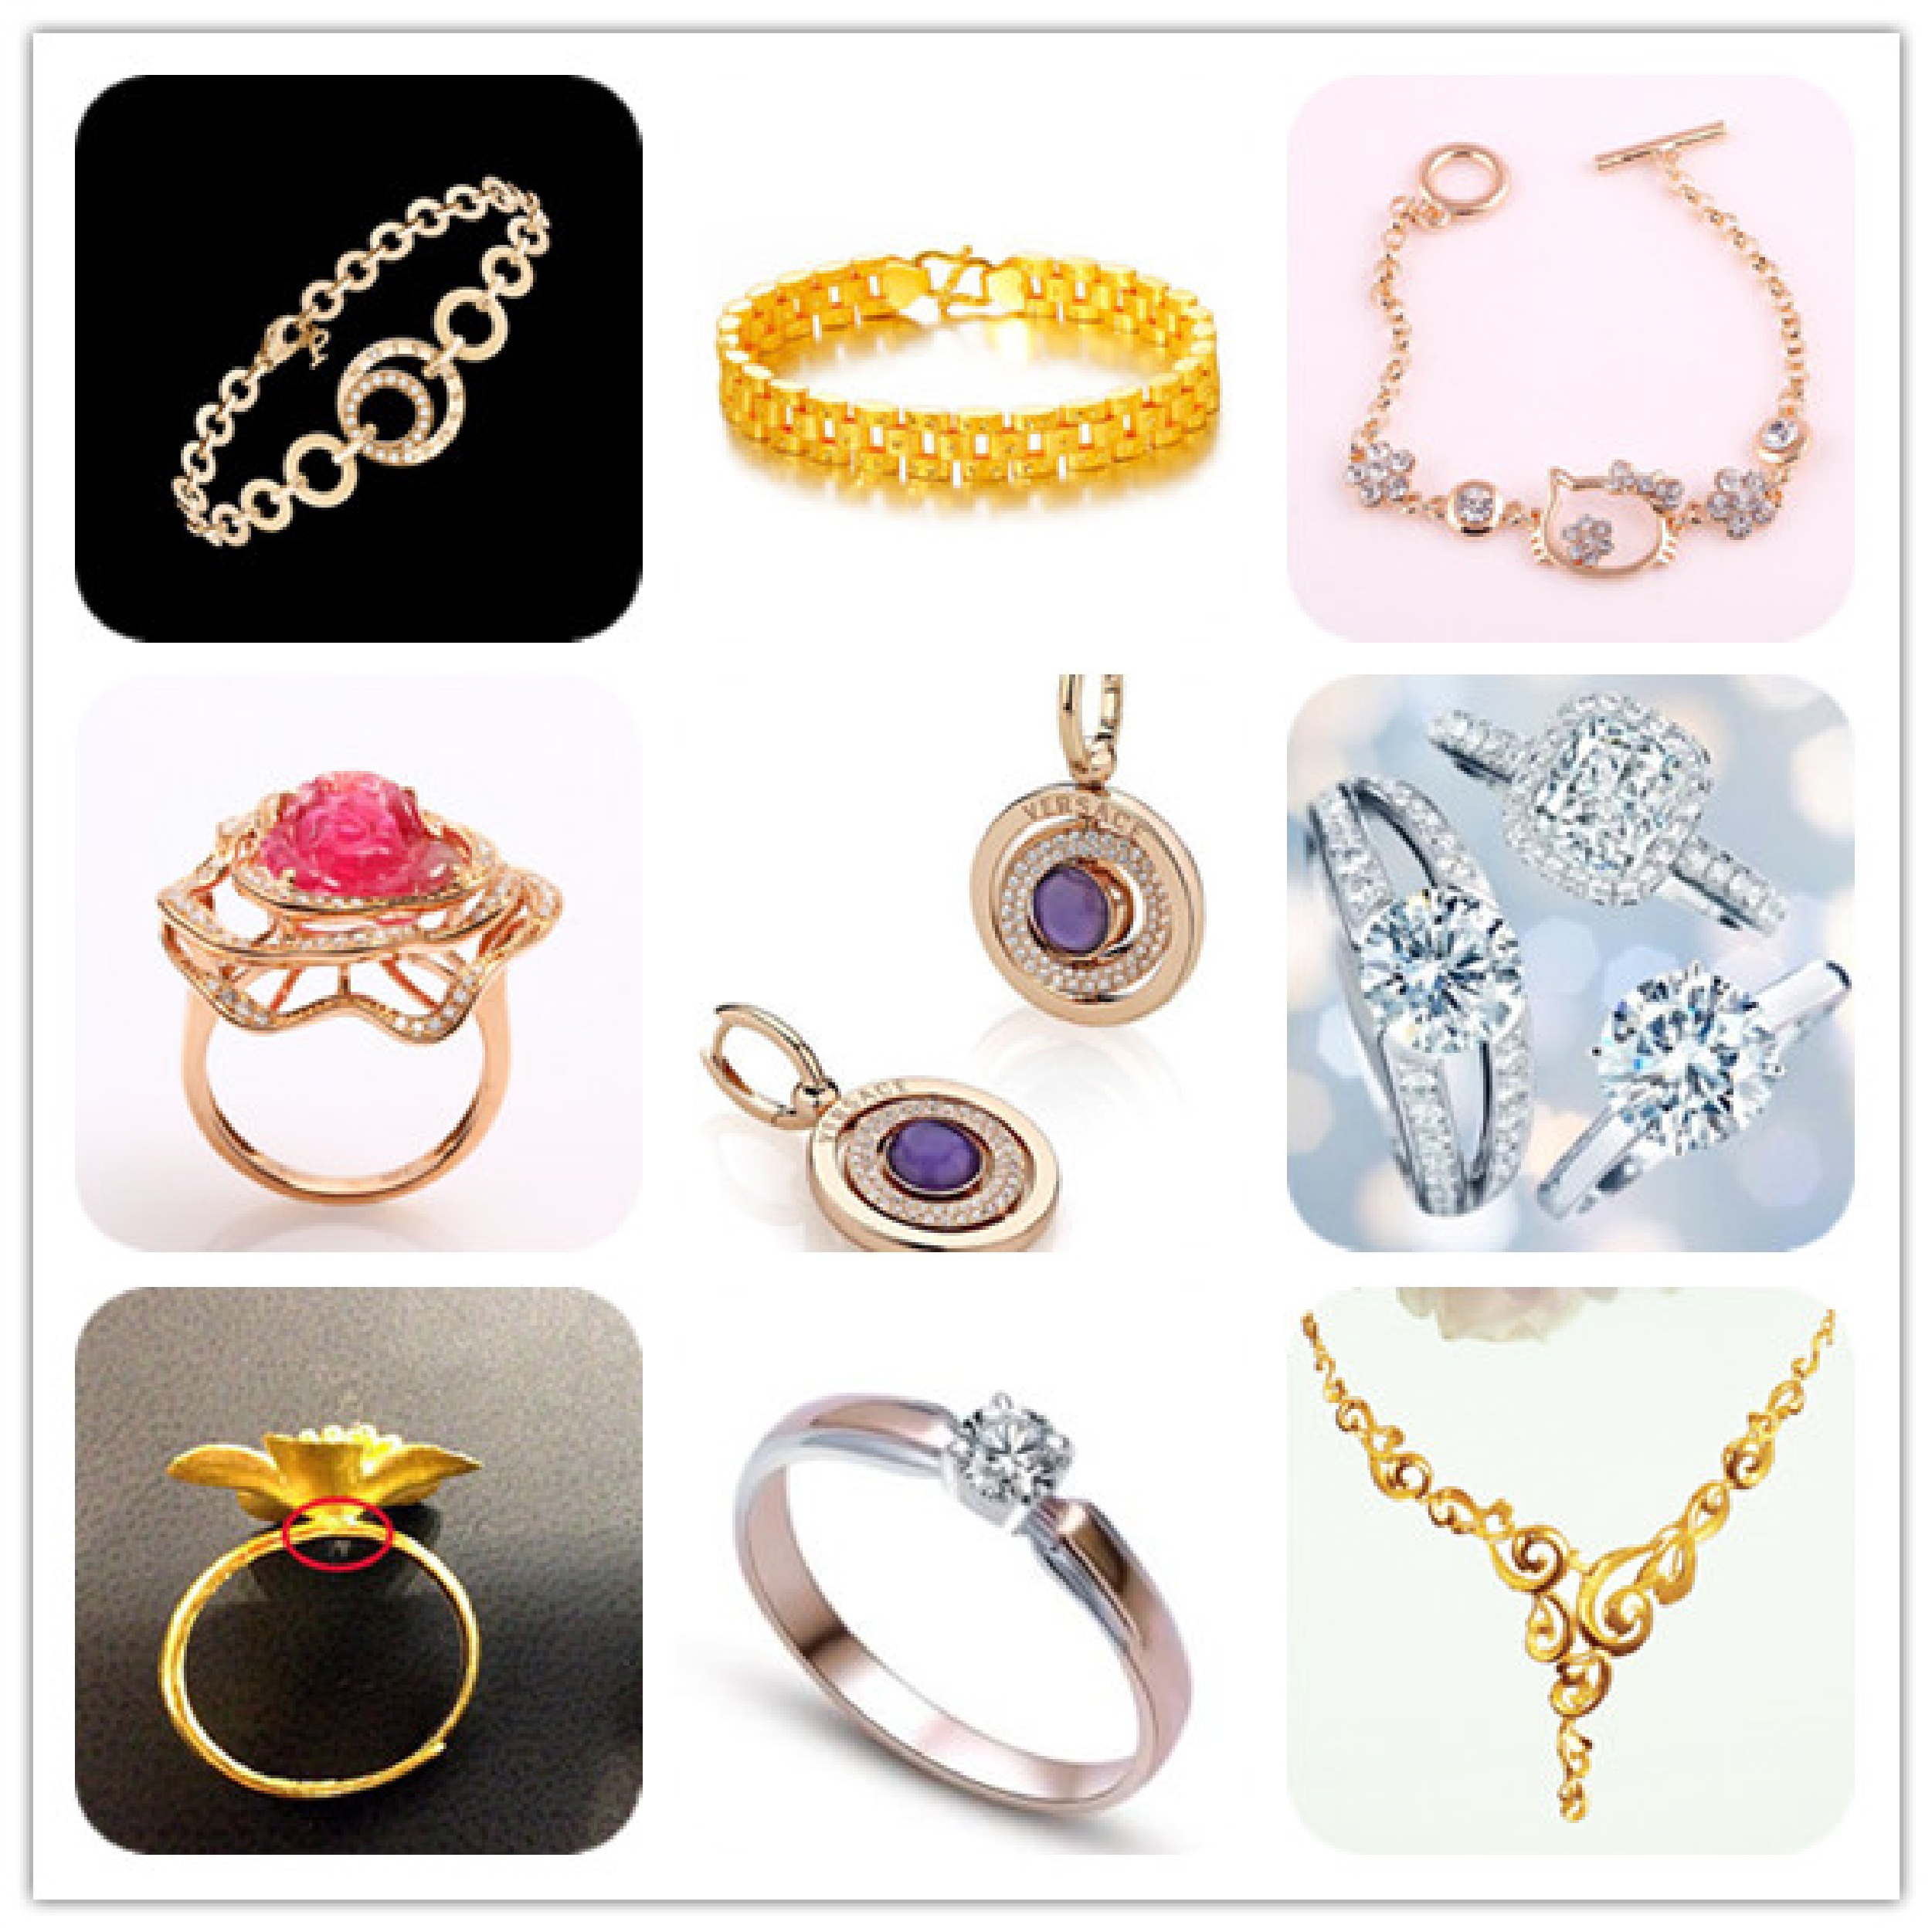 What are the application advantages of laser welding machine in jewelry industry?